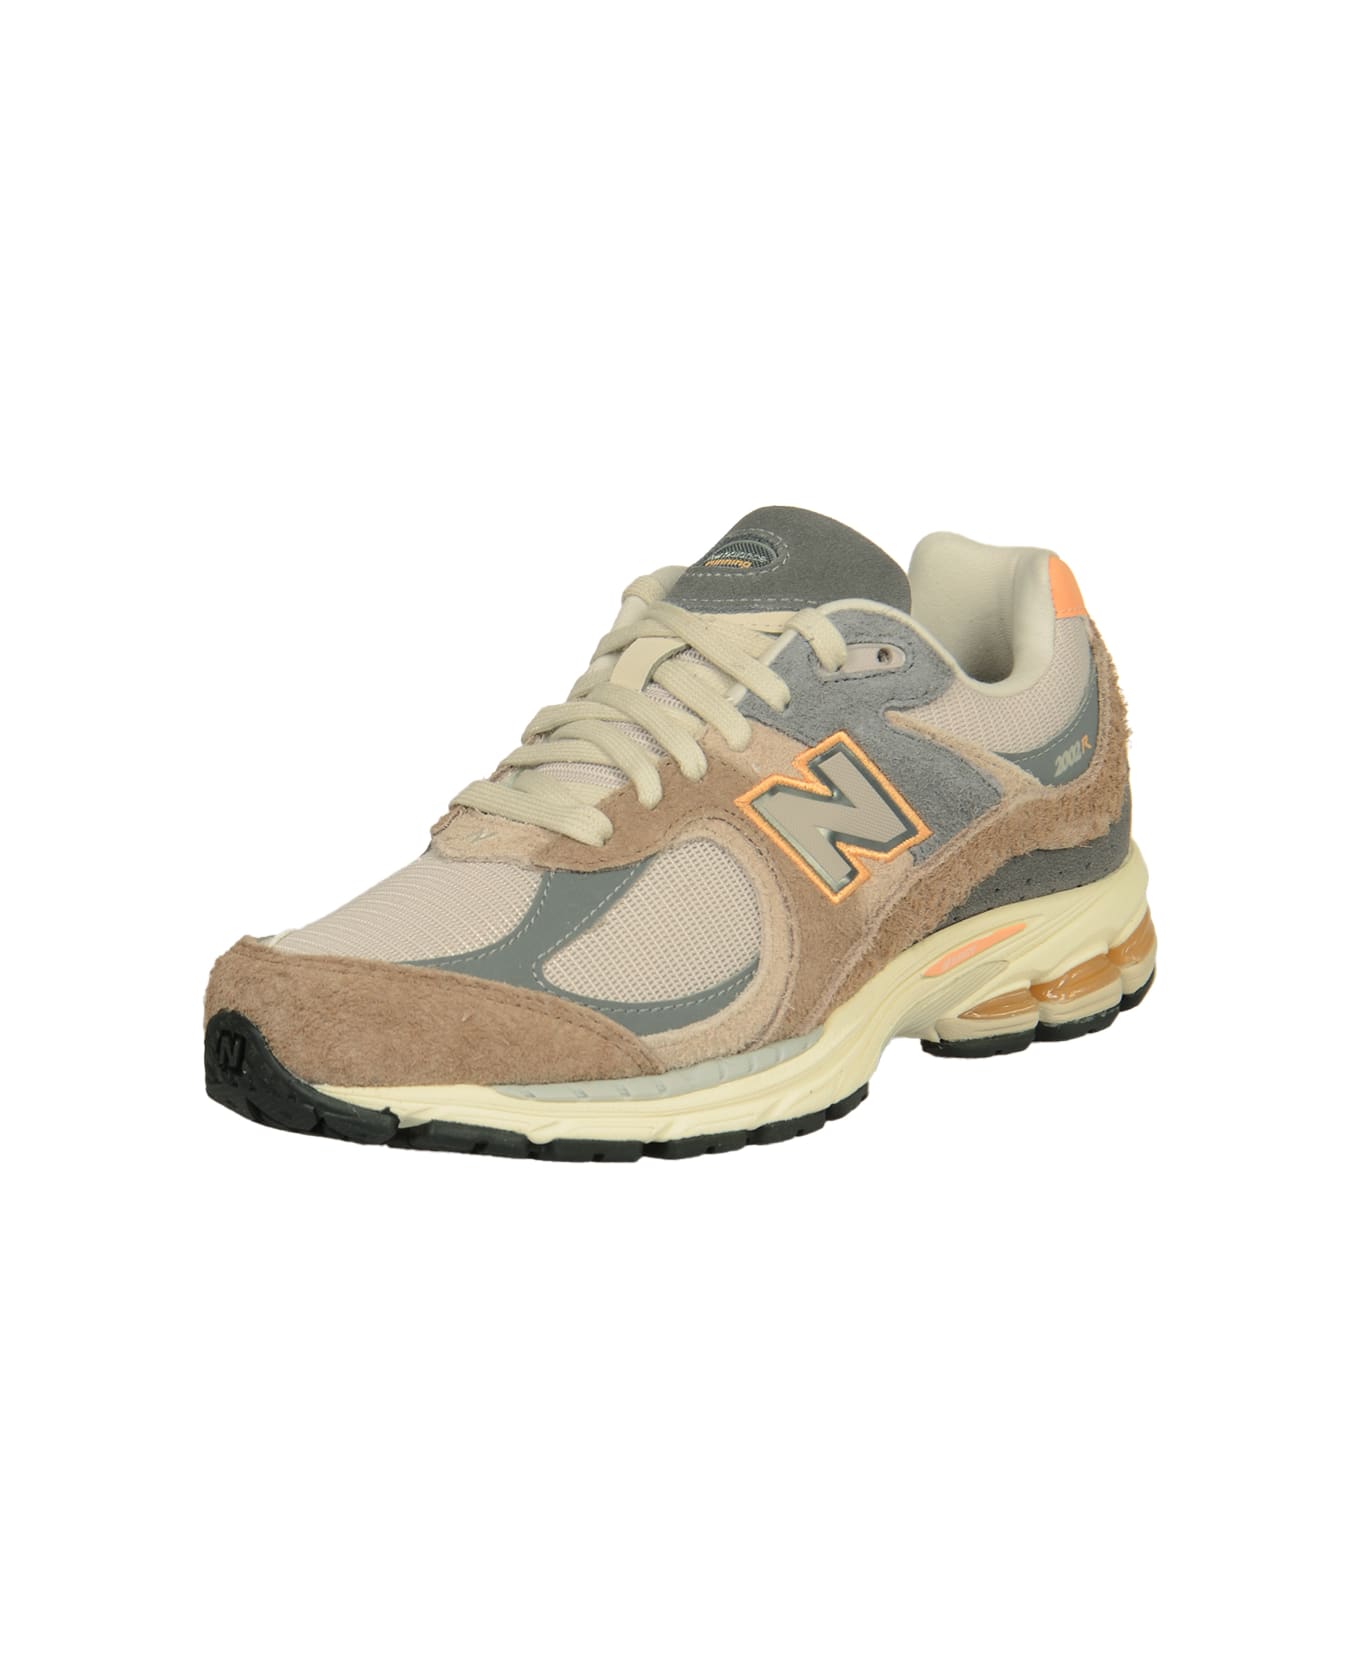 New Balance Logo Patched Sneakers スニーカー